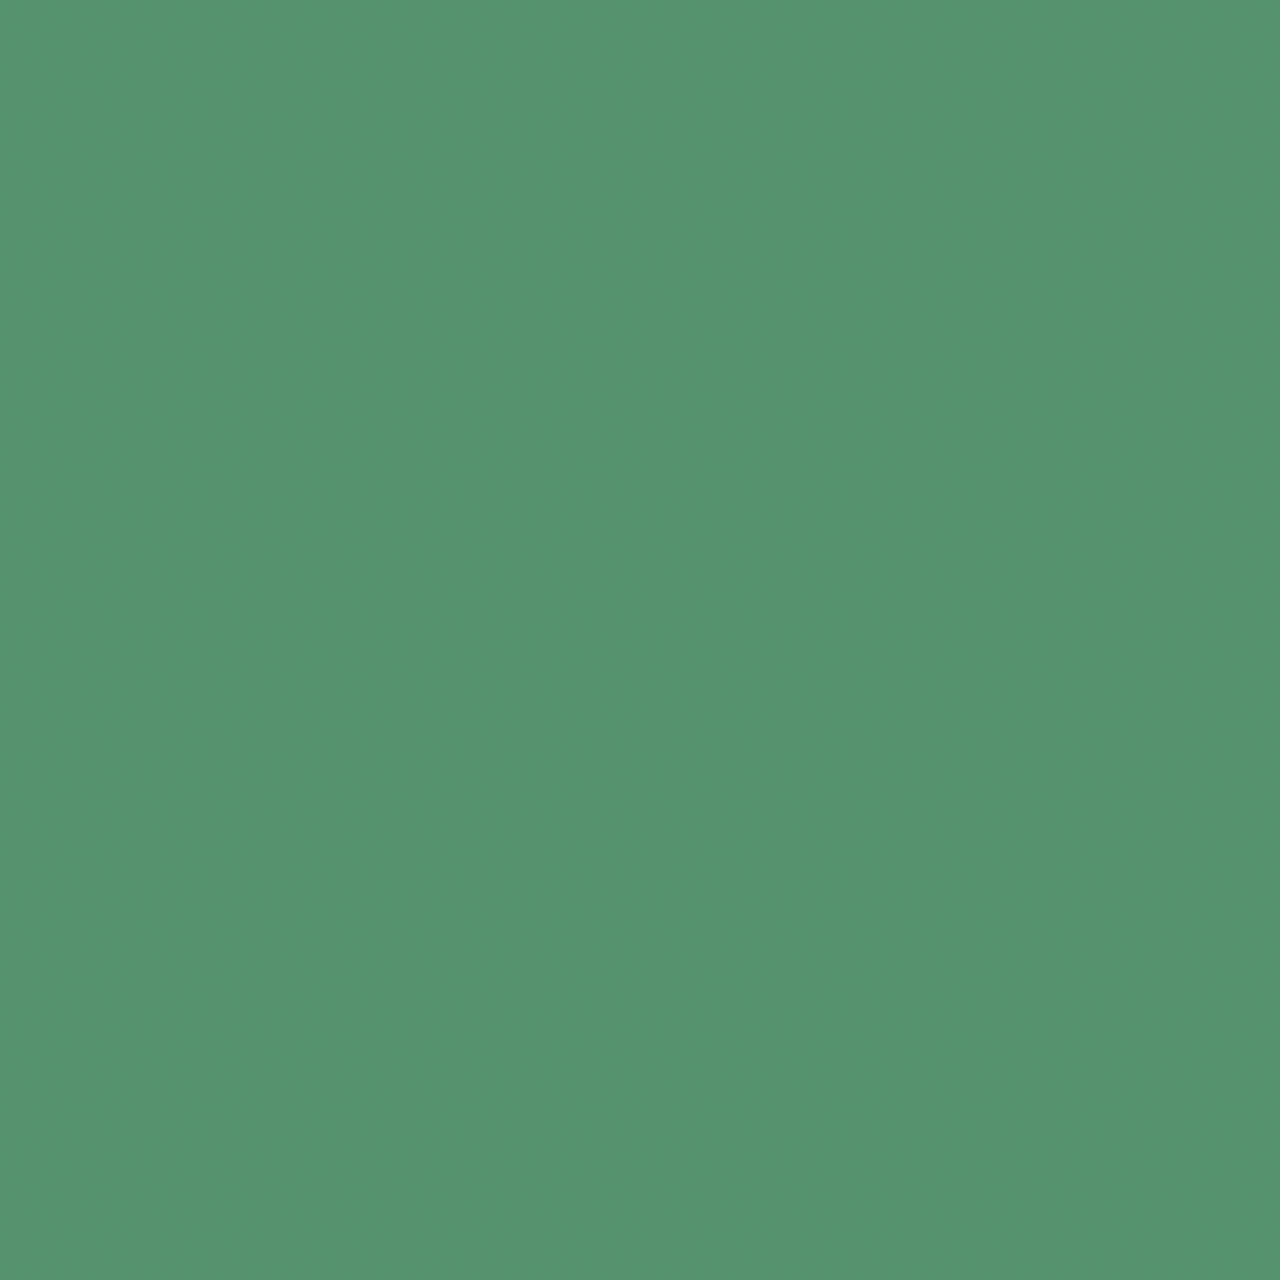 Emerald 121-035 PBS Fabrics Painter's Palette Solids collection